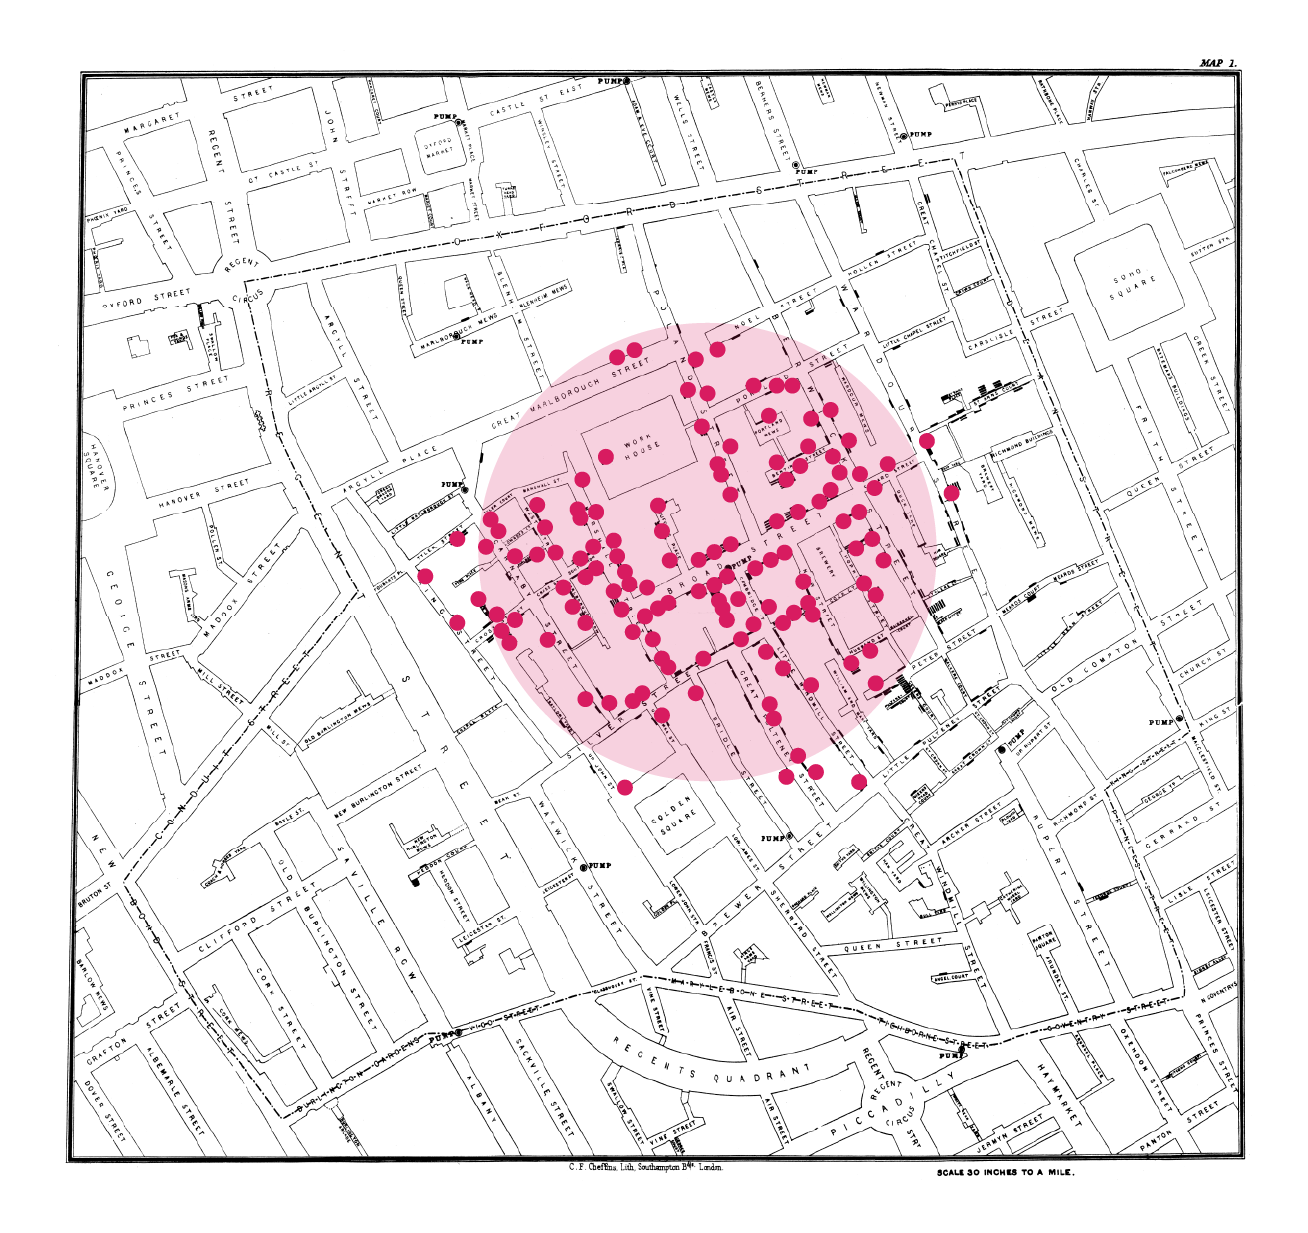 Map with plotted locations of people who died of cholera during the outbreak in London in 1852.